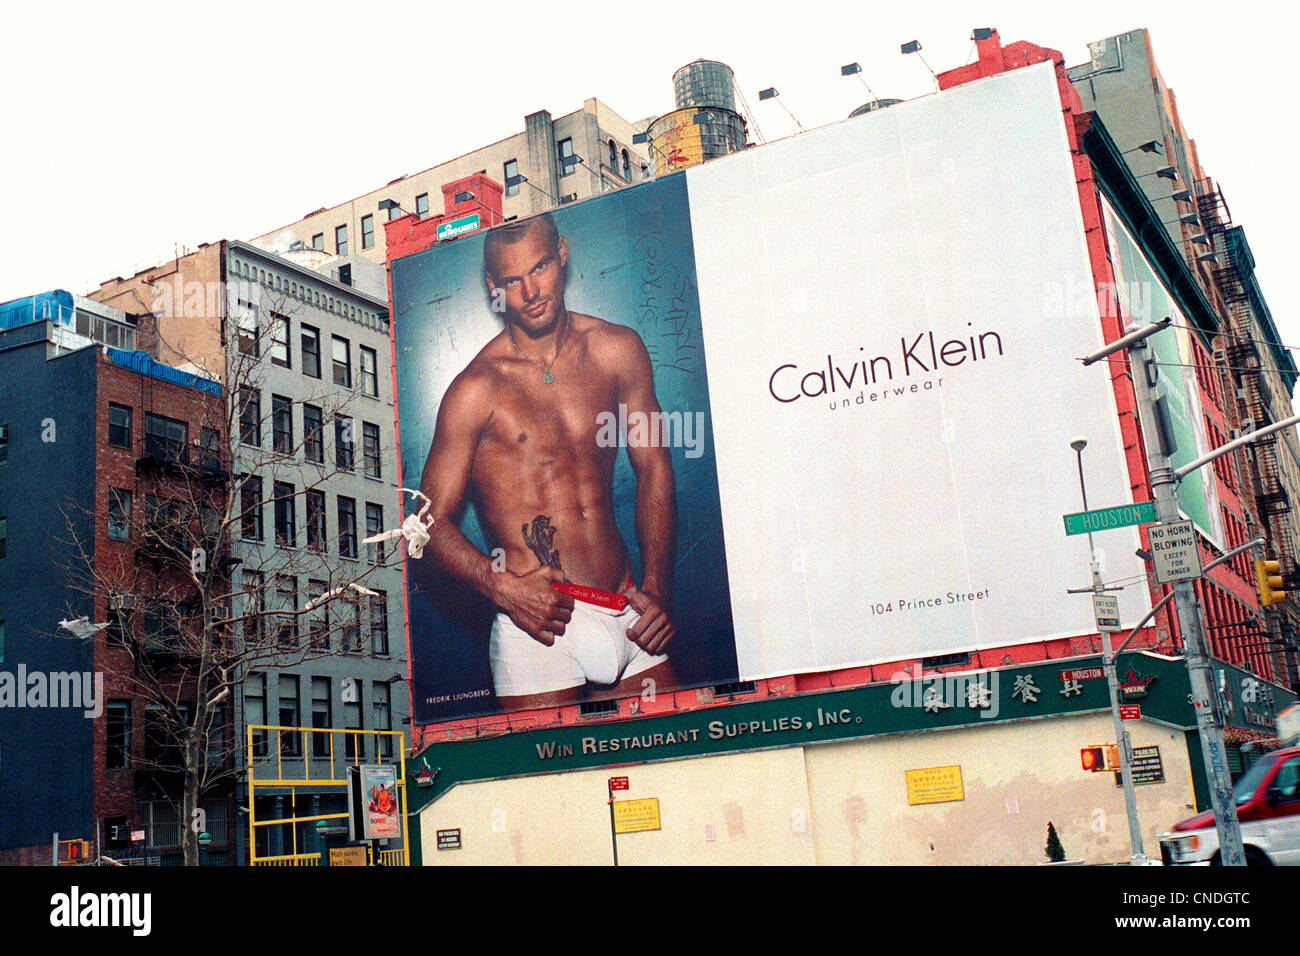 A billboard advertising Calvin Klein Jeans on the side of a building in  Soho in New York Stock Photo - Alamy